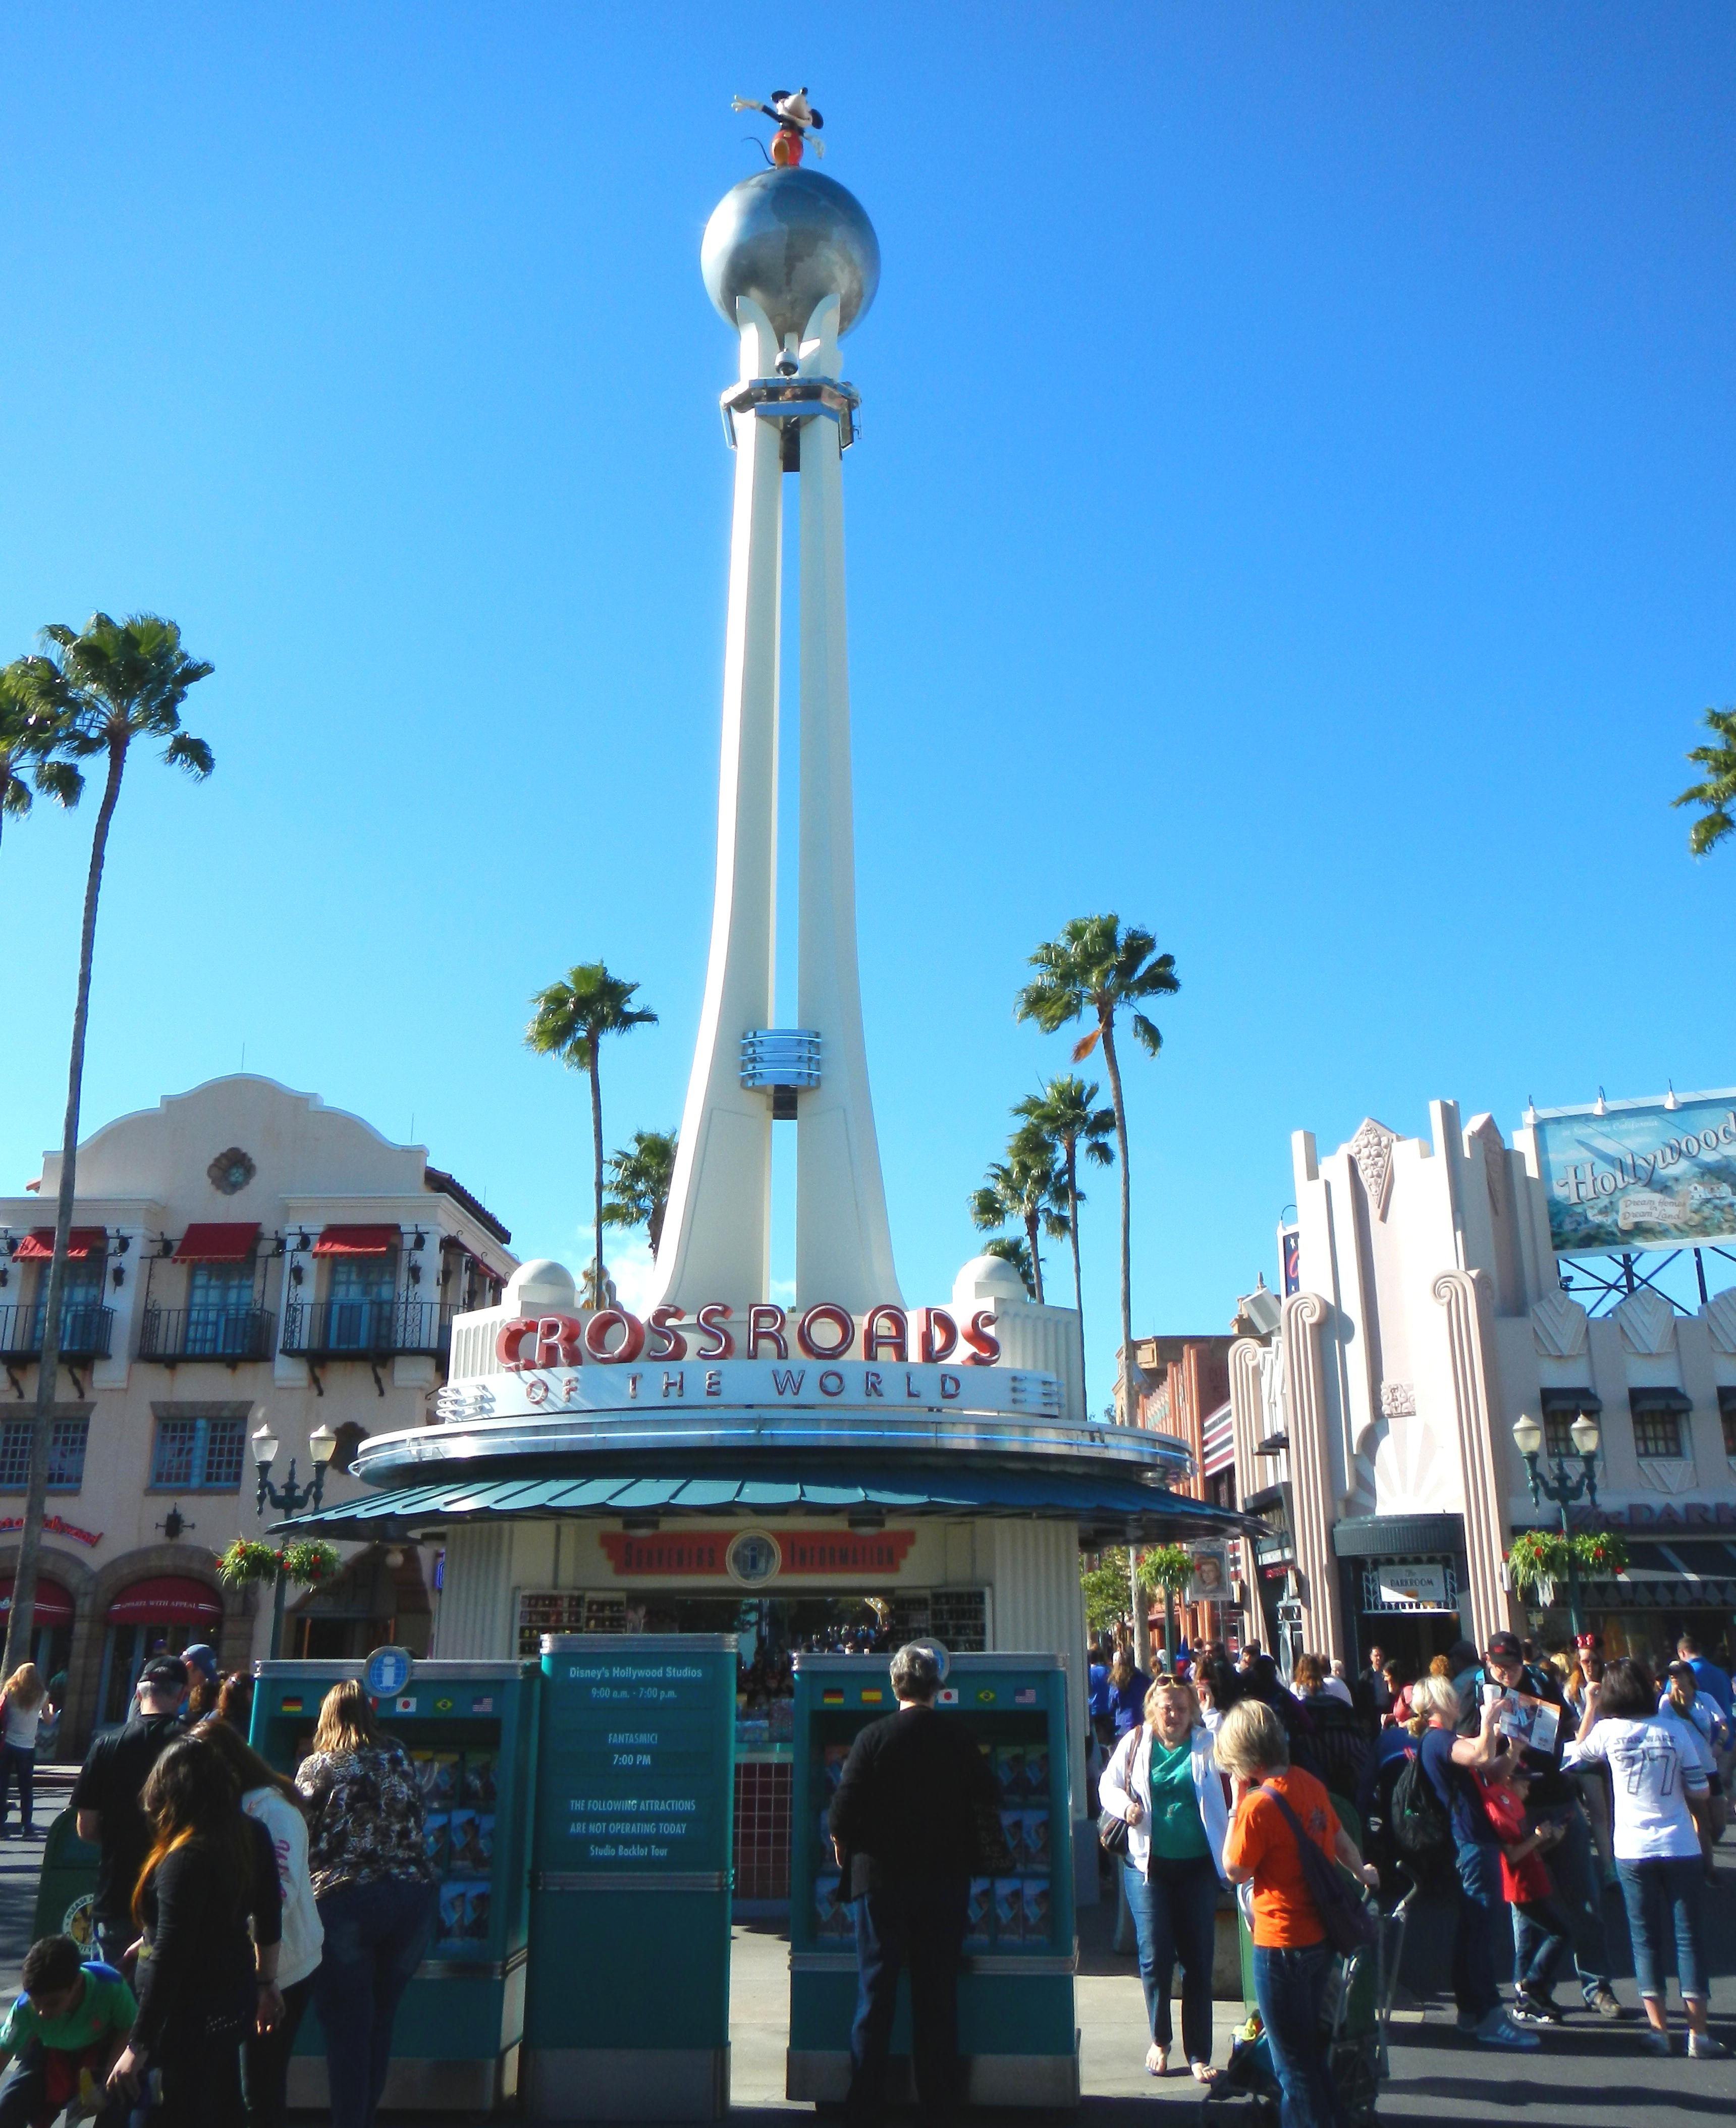 Crossroads of the World at the entrance to Disney's Hollywood Studios.